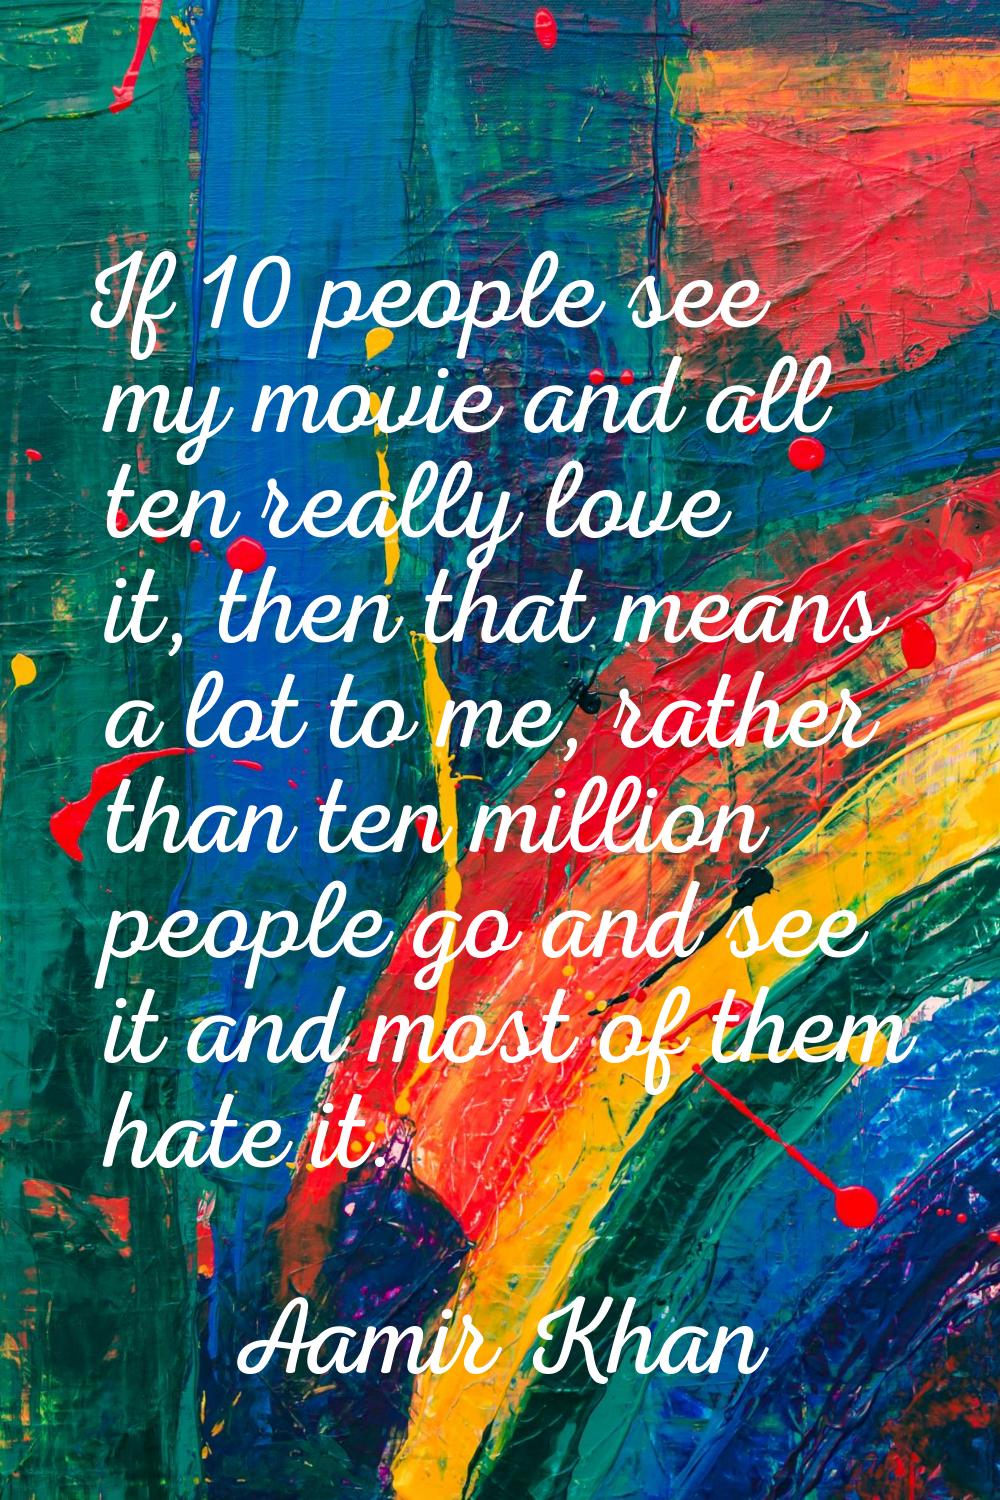 If 10 people see my movie and all ten really love it, then that means a lot to me, rather than ten 